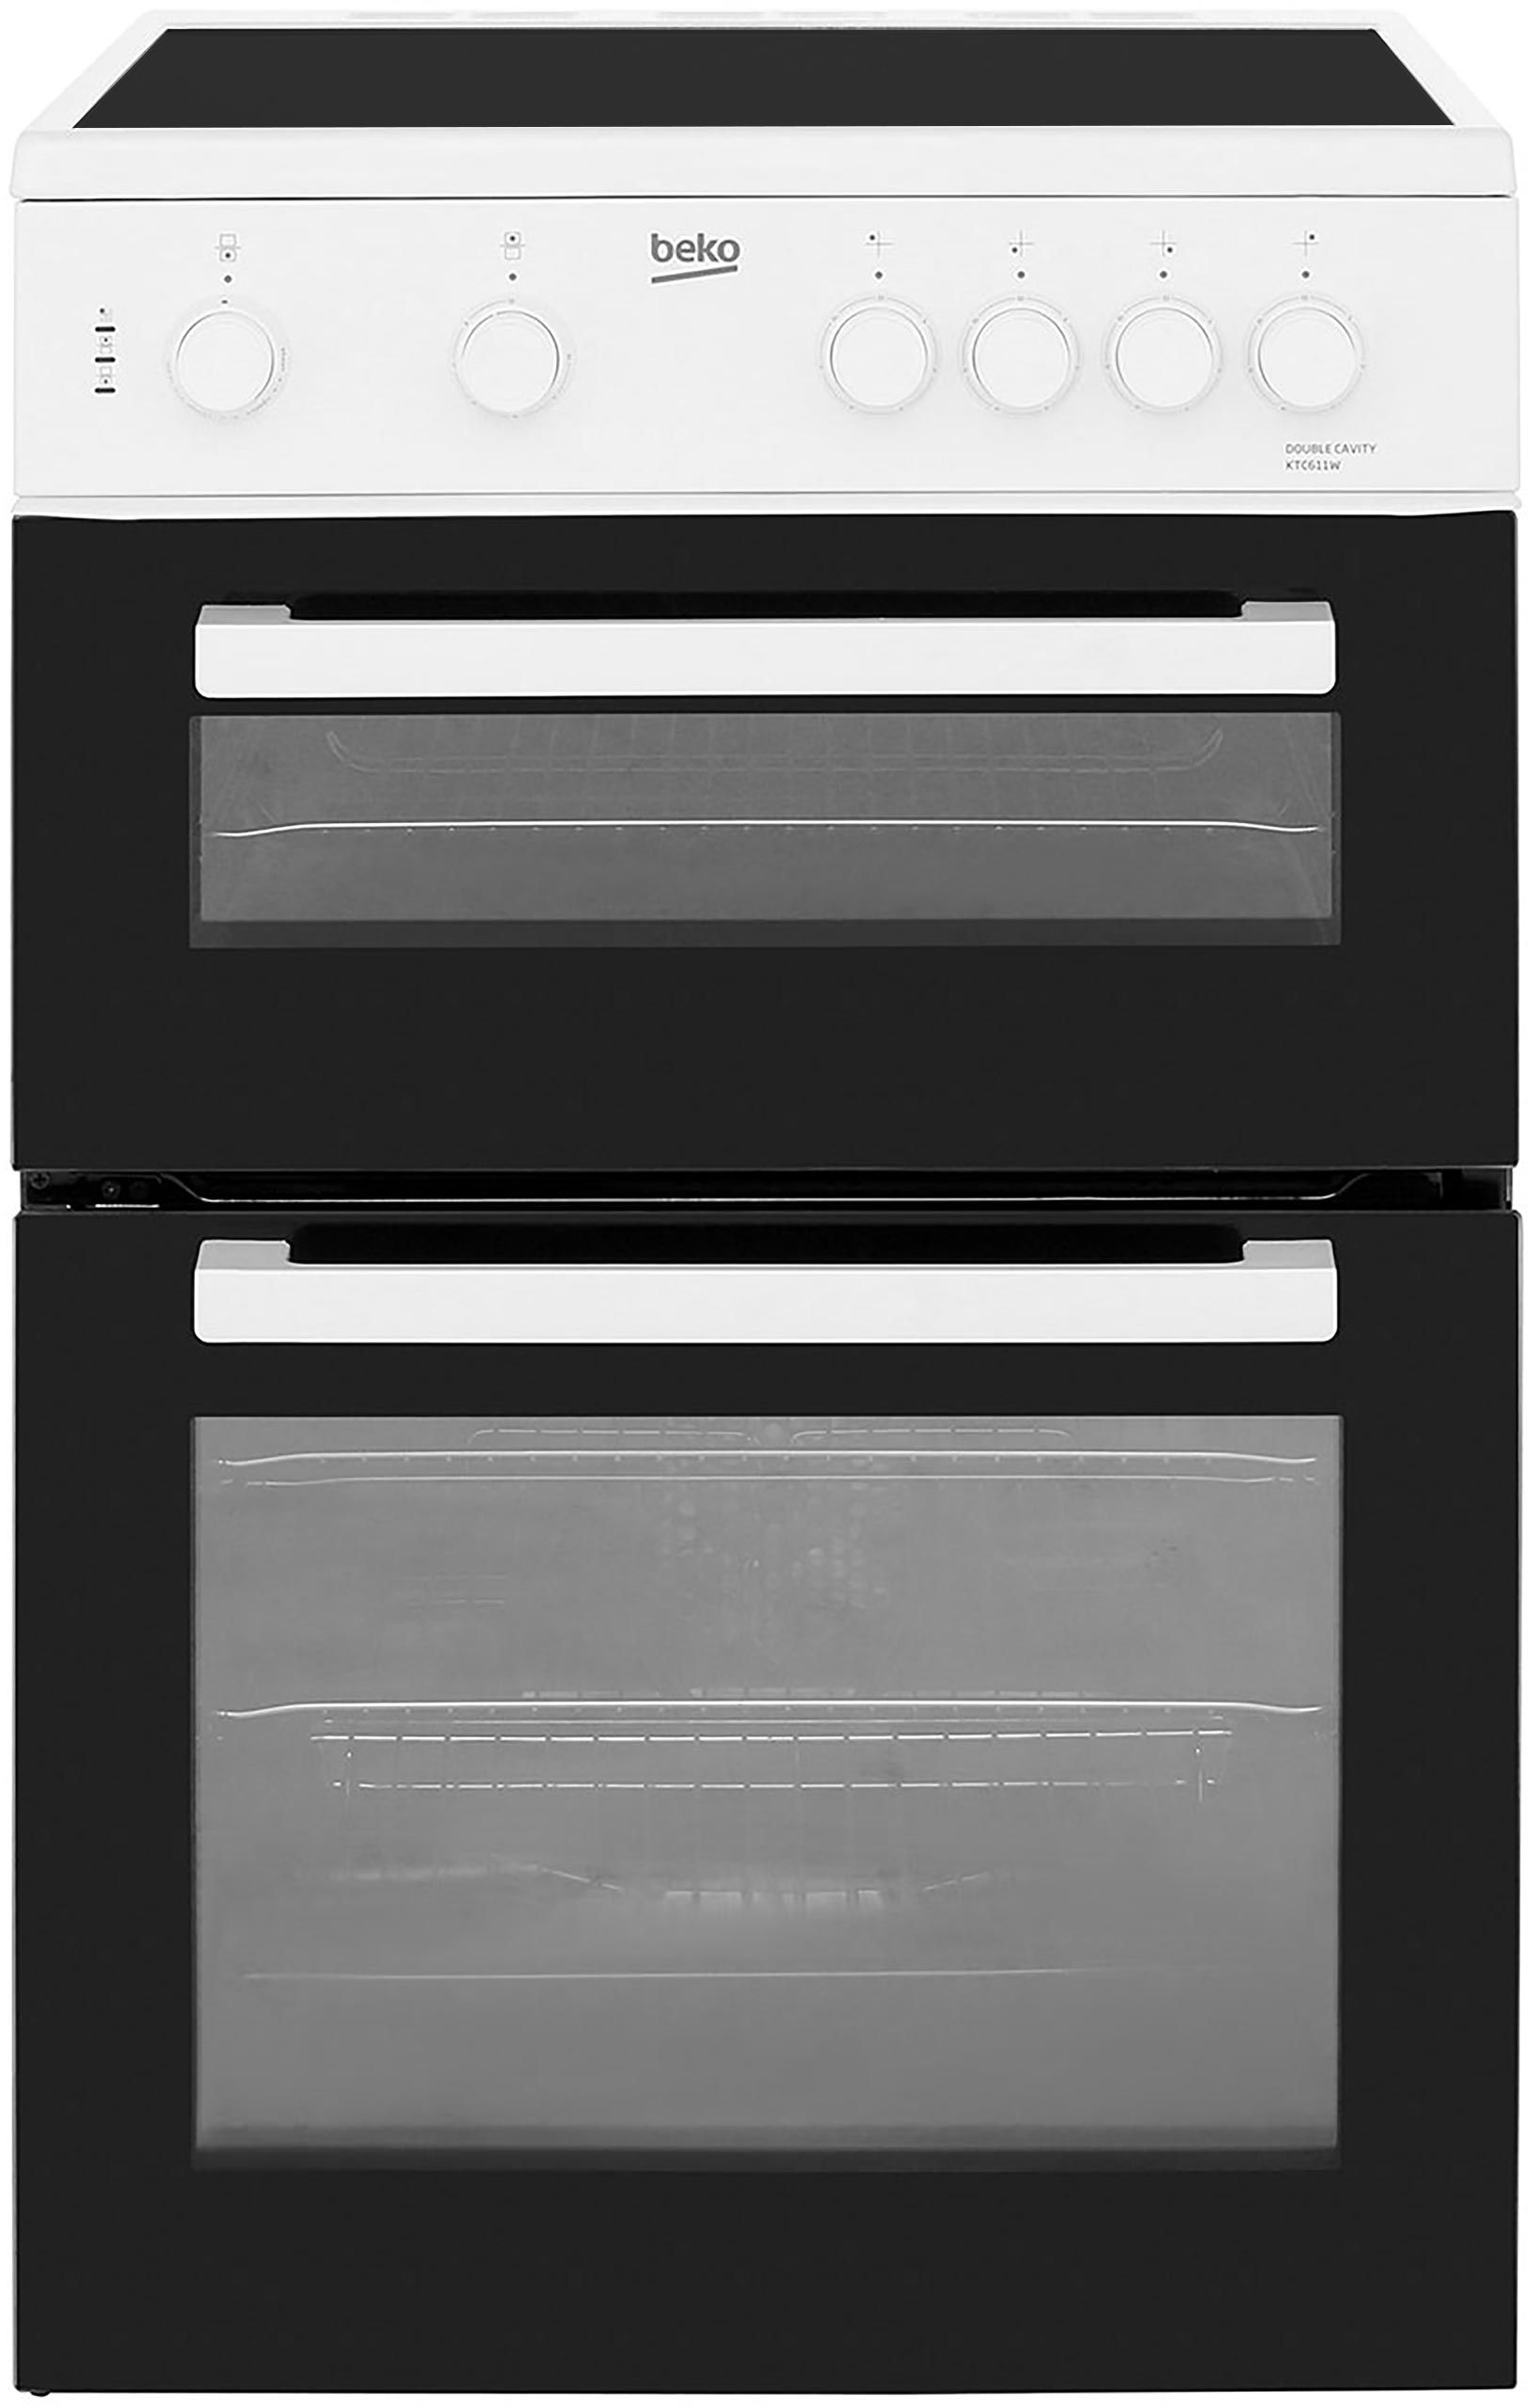 Beko KTC611W 60cm Electric Cooker with Ceramic Hob - White - A Rated, White